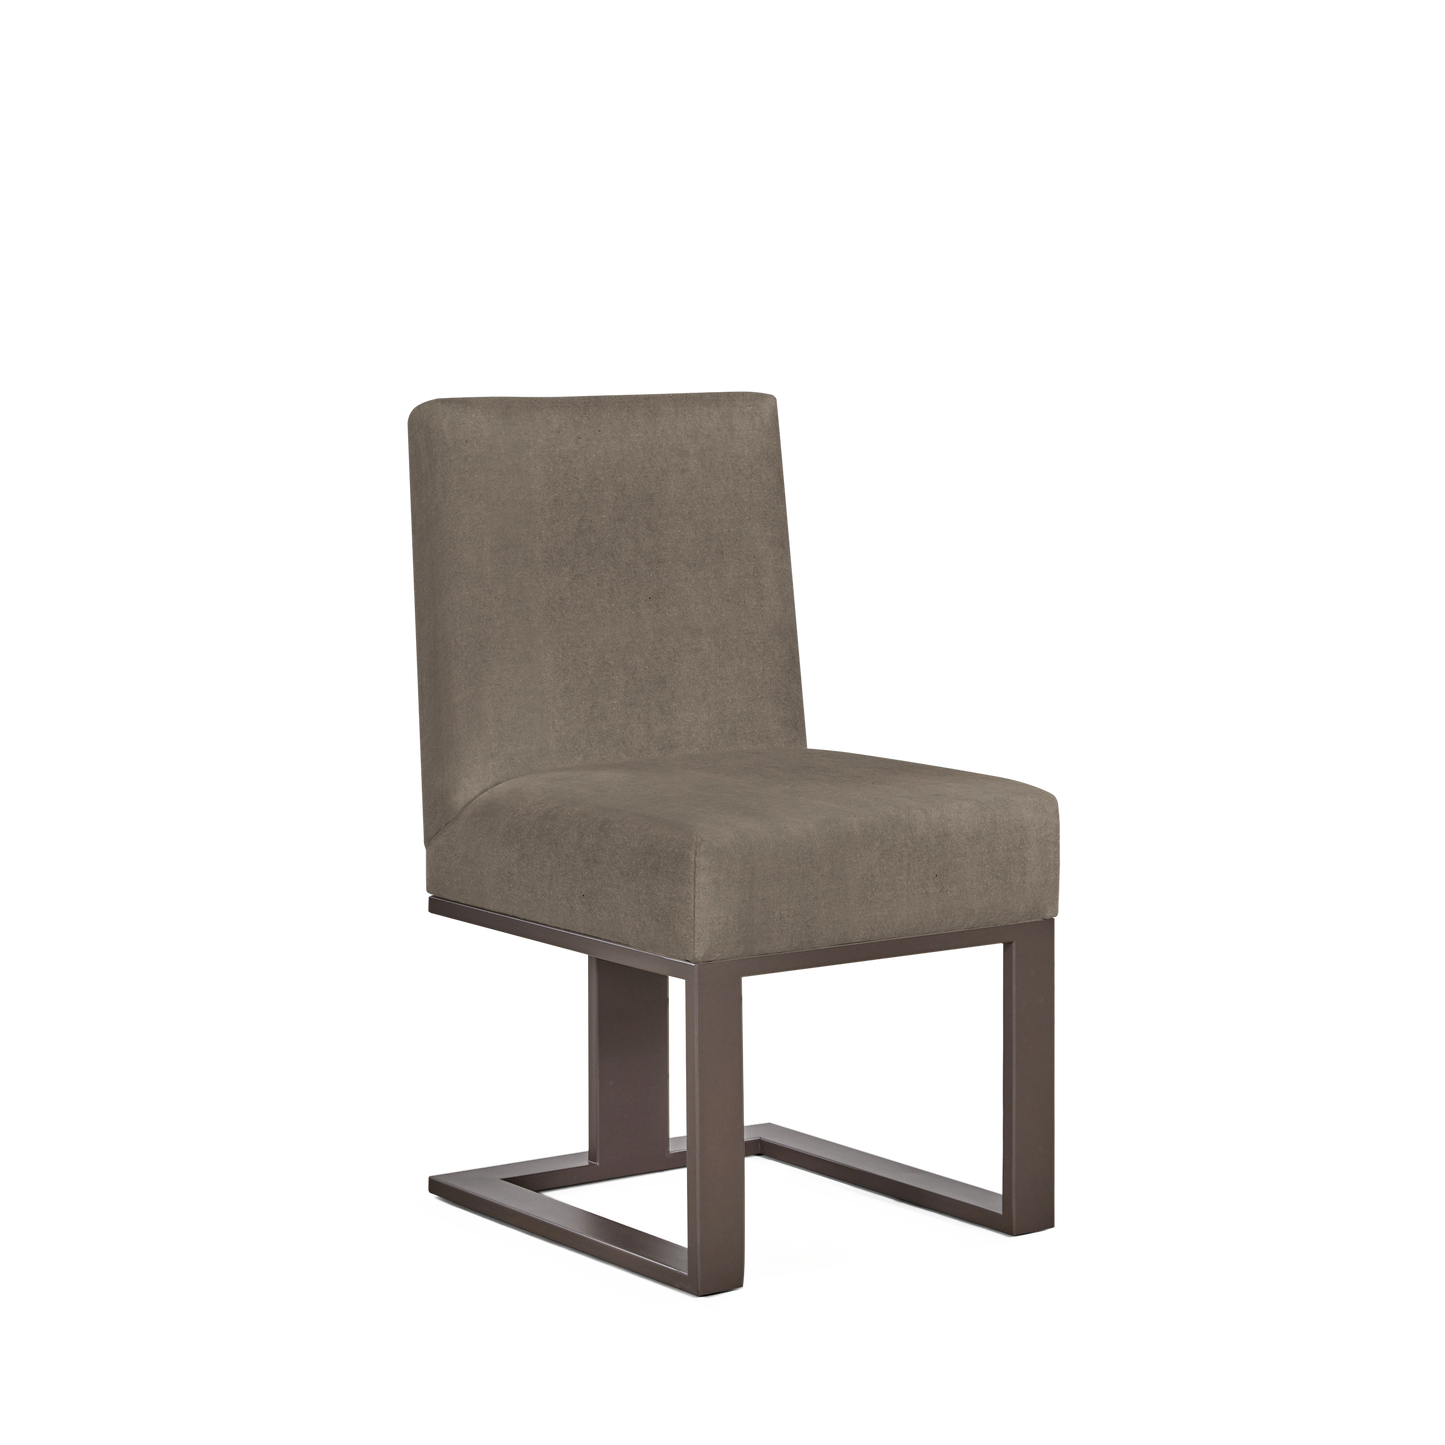 Len chair with suede grey textile and moka wood legs 